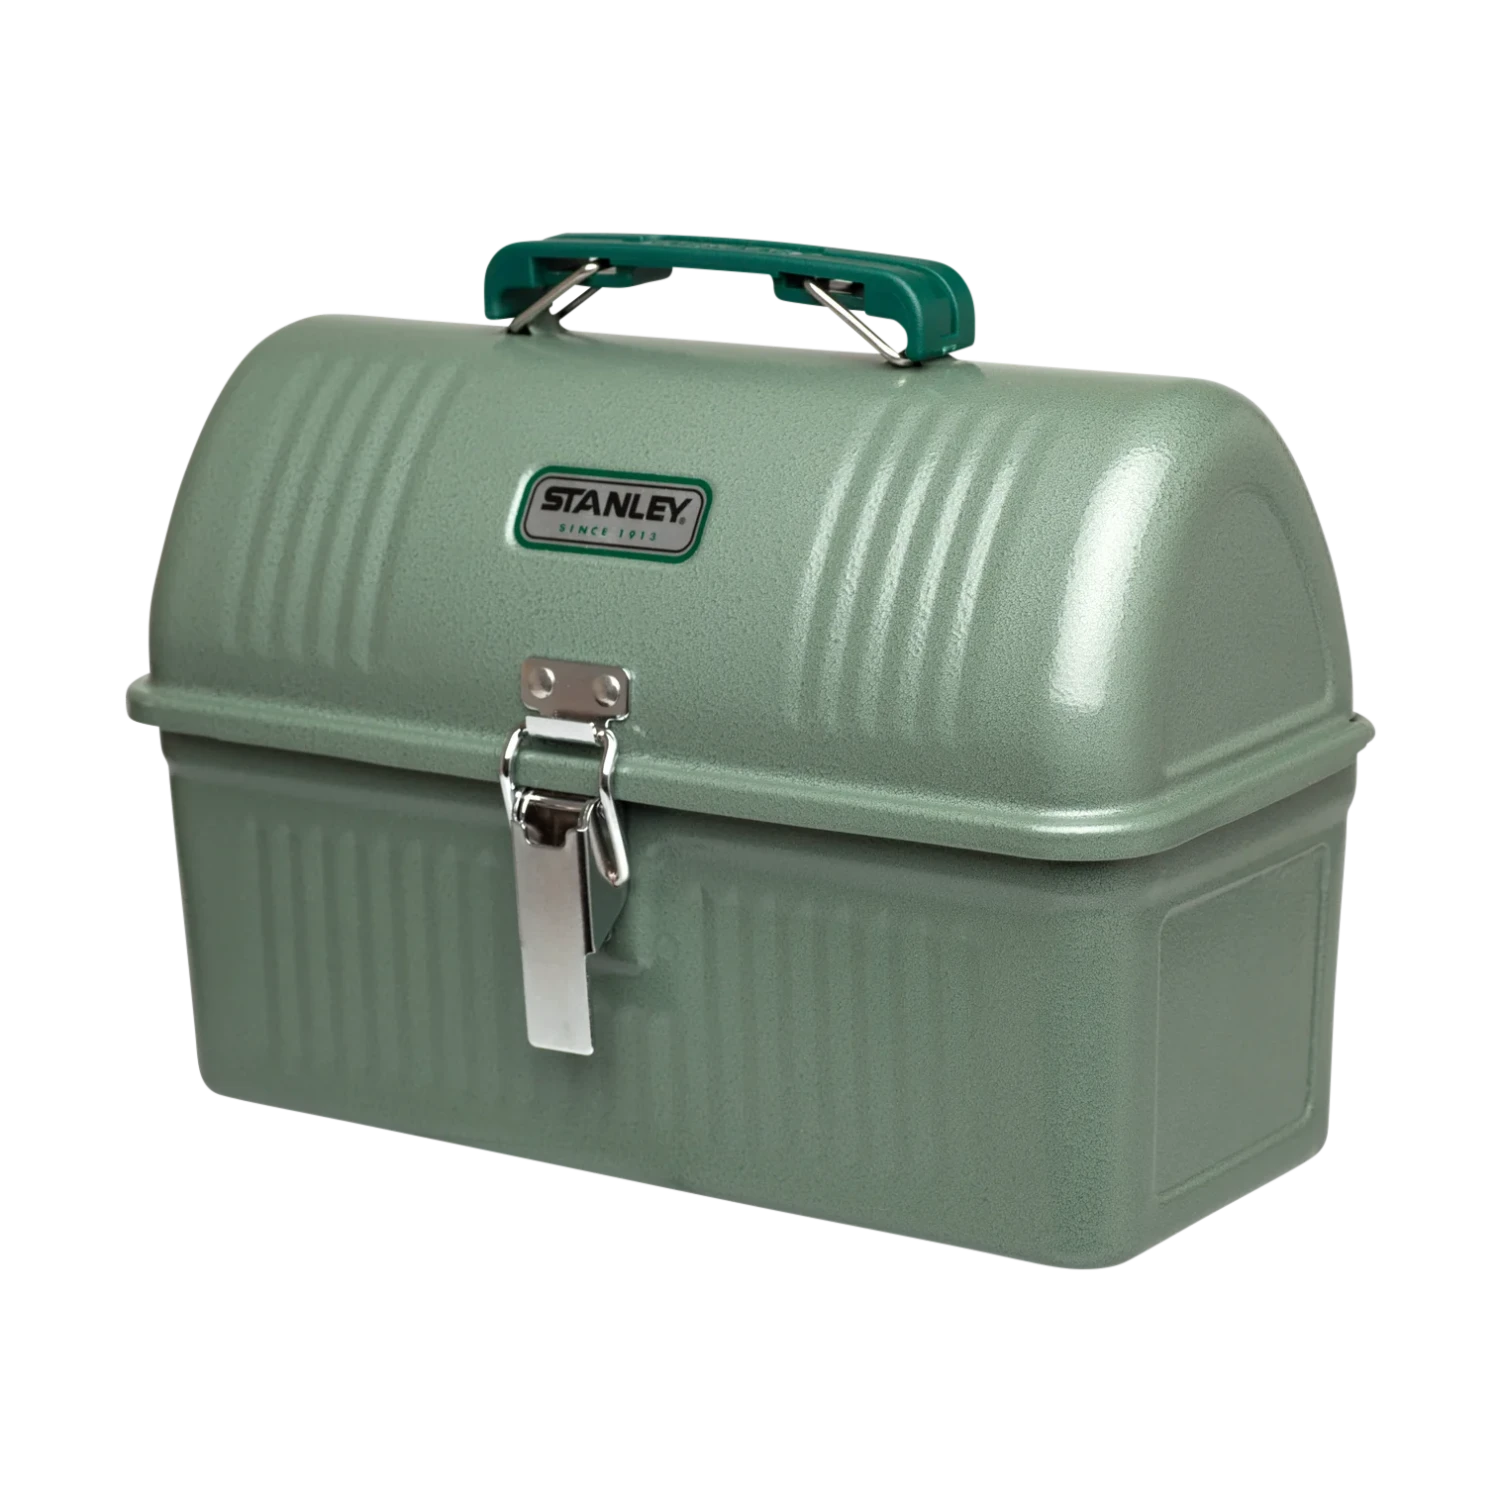 Stanley Classic Lunch Box 5.5 QT in hammertone green side